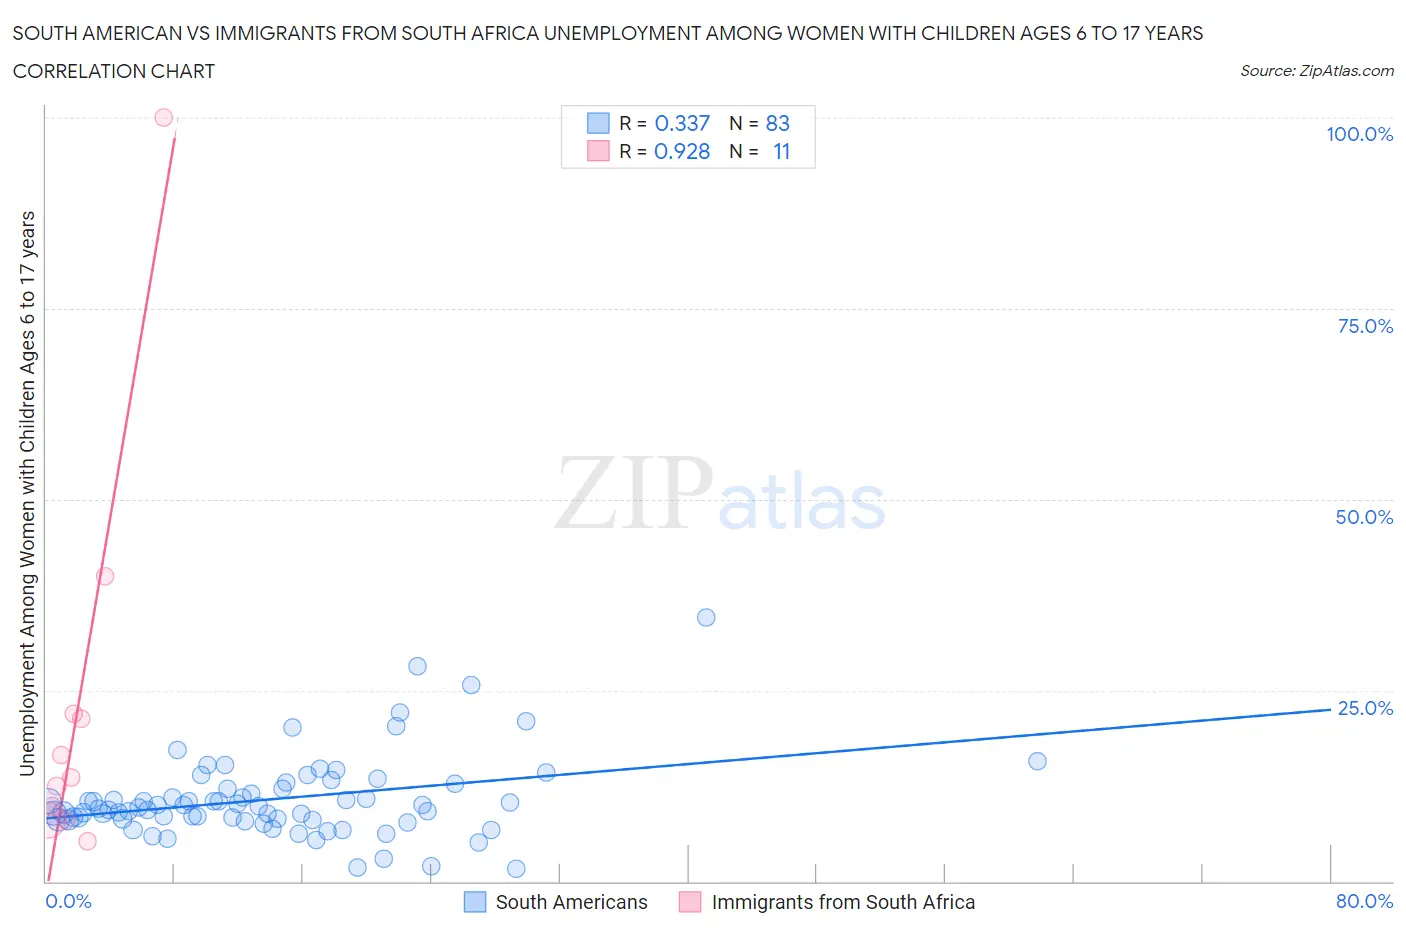 South American vs Immigrants from South Africa Unemployment Among Women with Children Ages 6 to 17 years